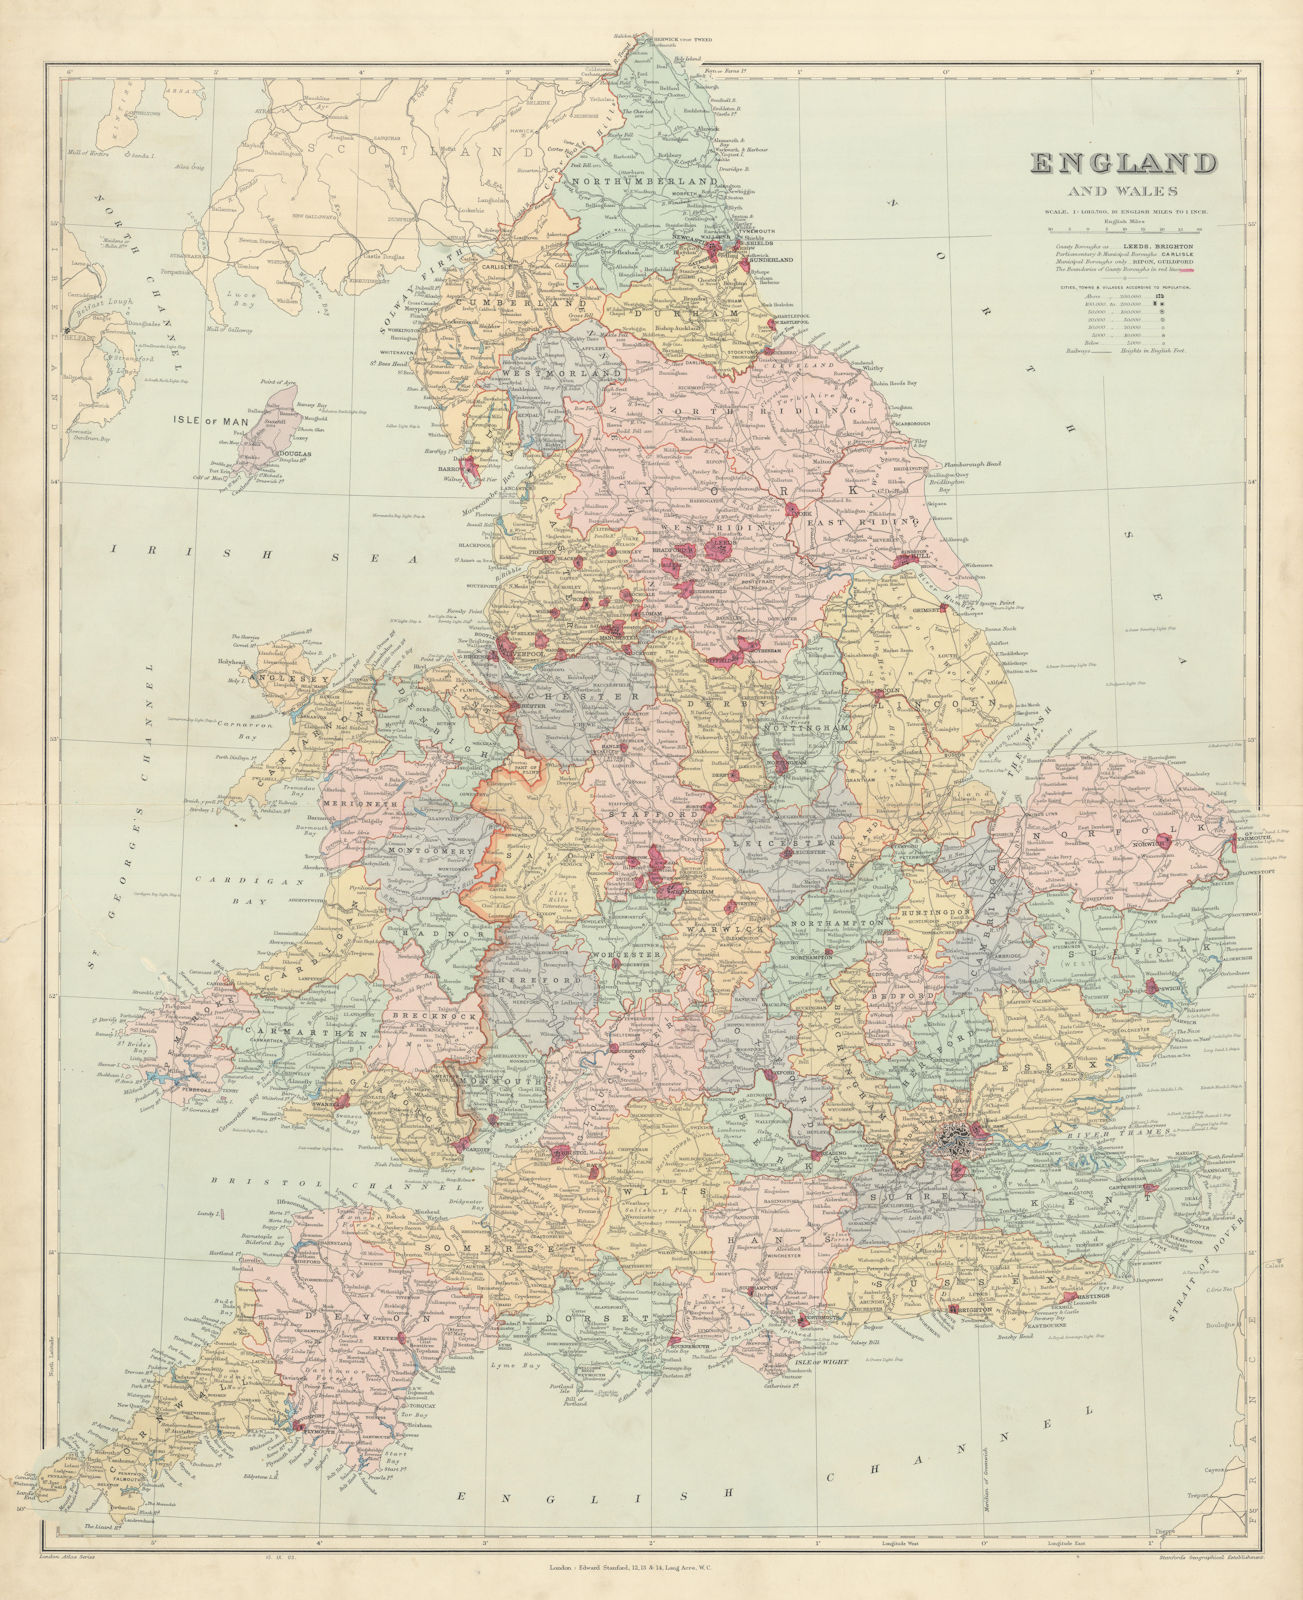 Associate Product England and Wales in counties. Railways. Large 68x55cm. STANFORD 1904 old map